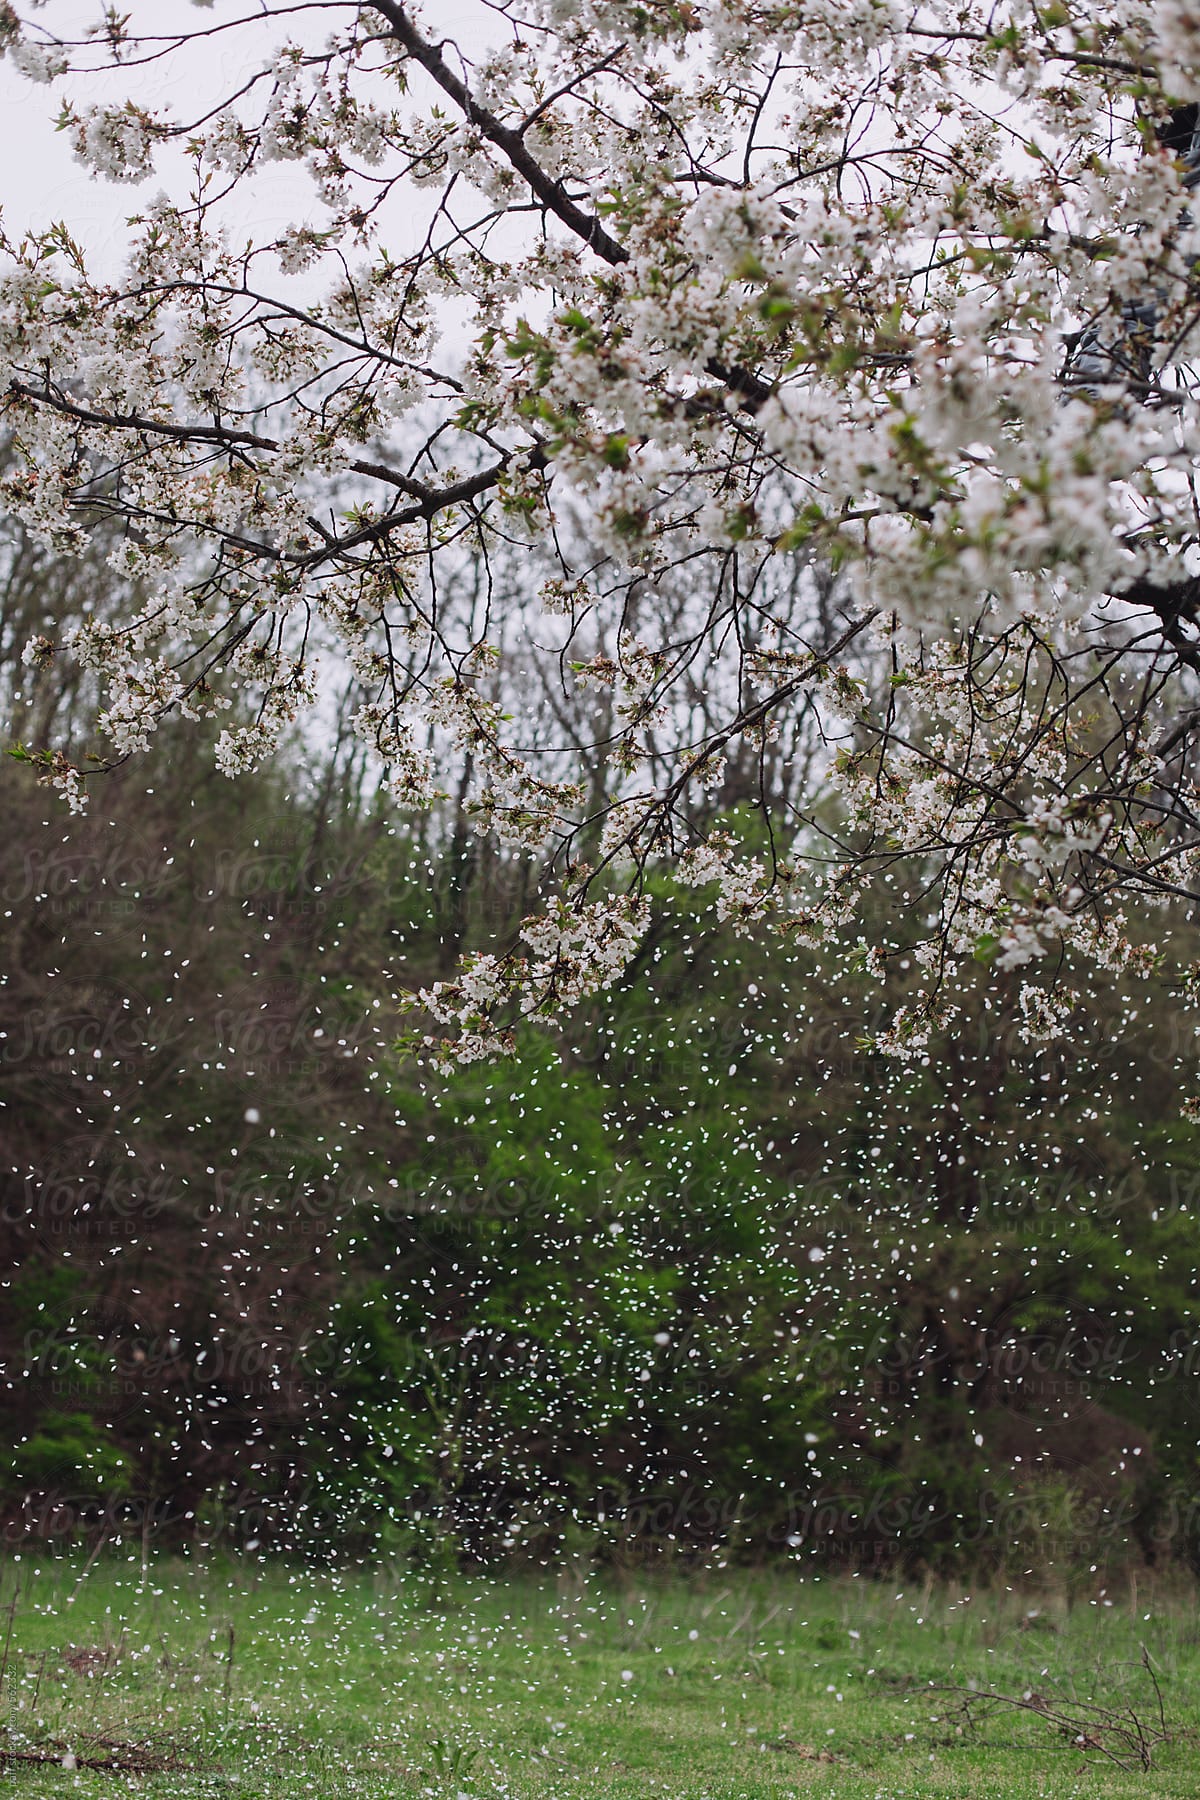 White petals falling from apple blossom tree